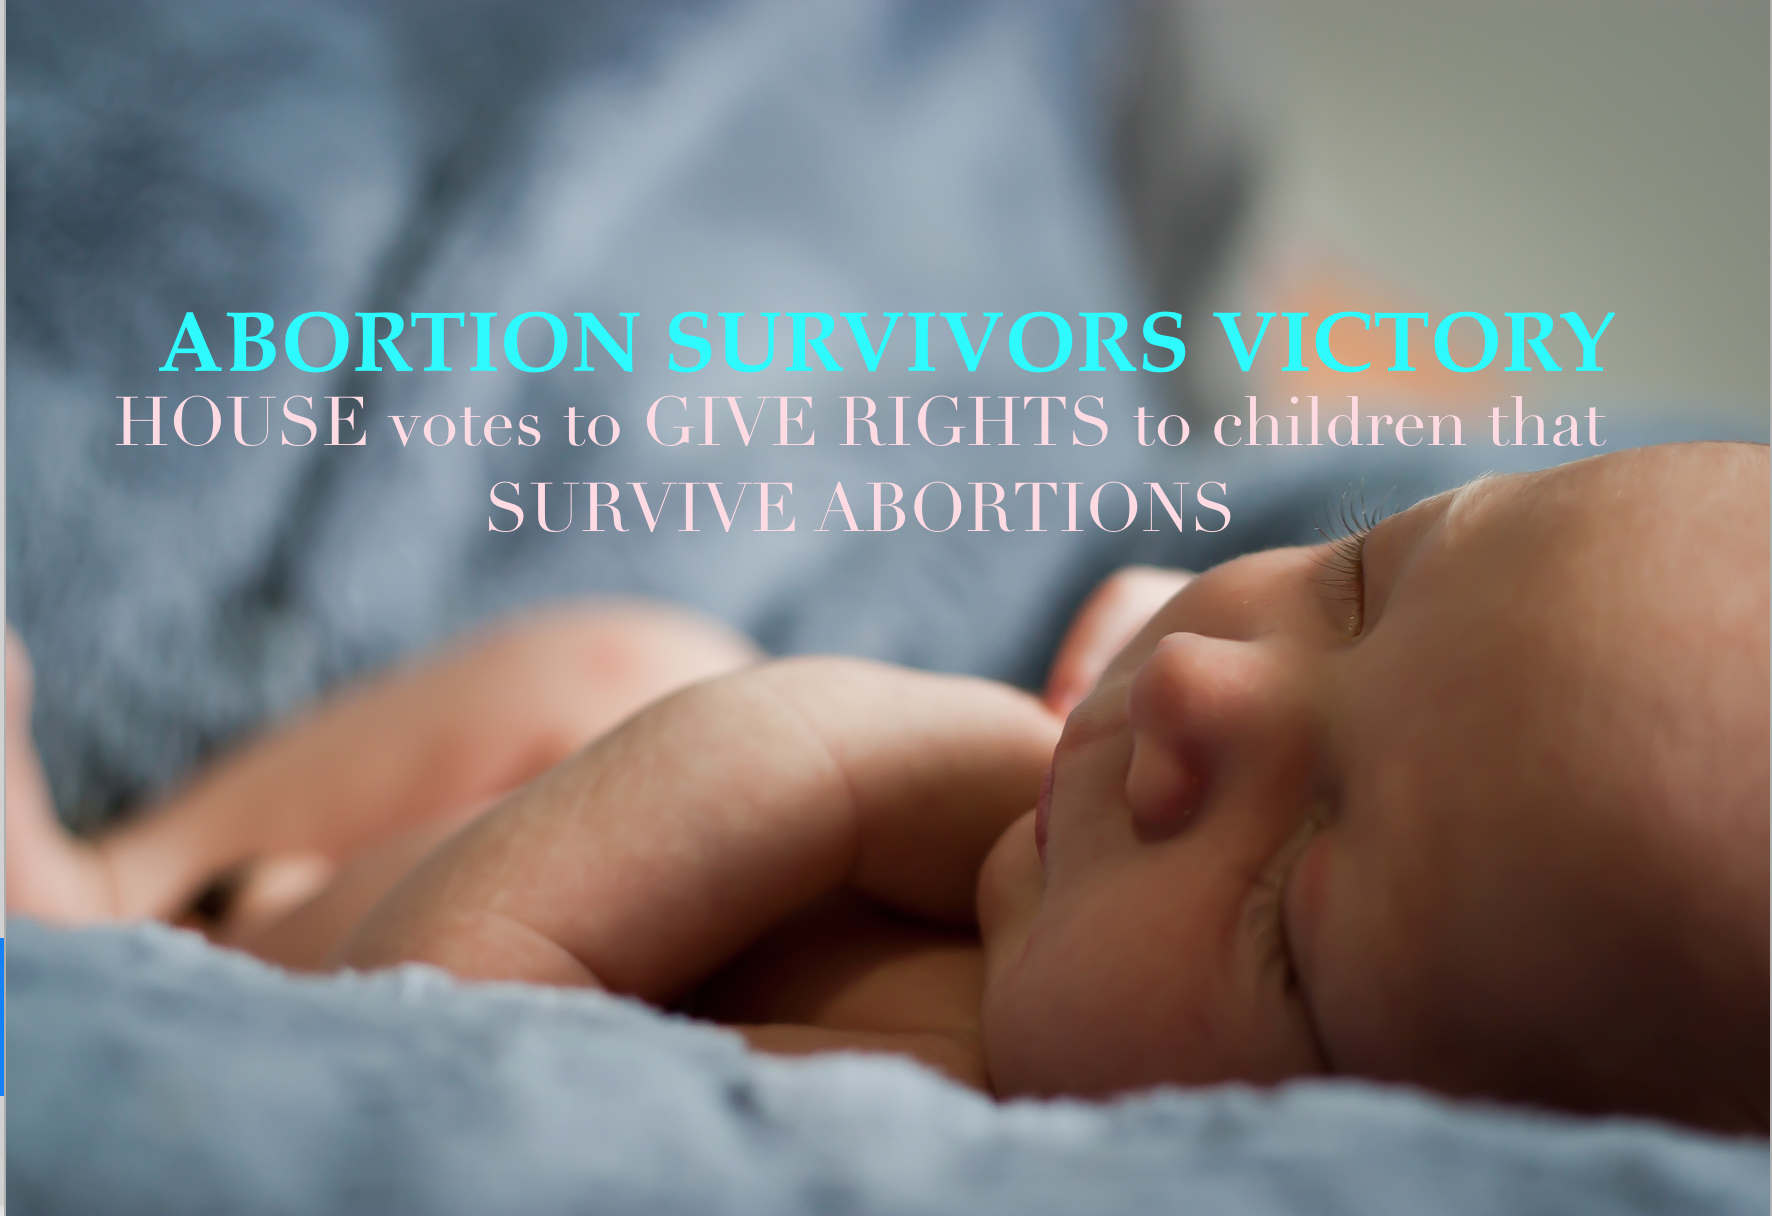 Featured image for “HOUSE votes to GIVE RIGHTS to children that SURVIVE ABORTIONS”